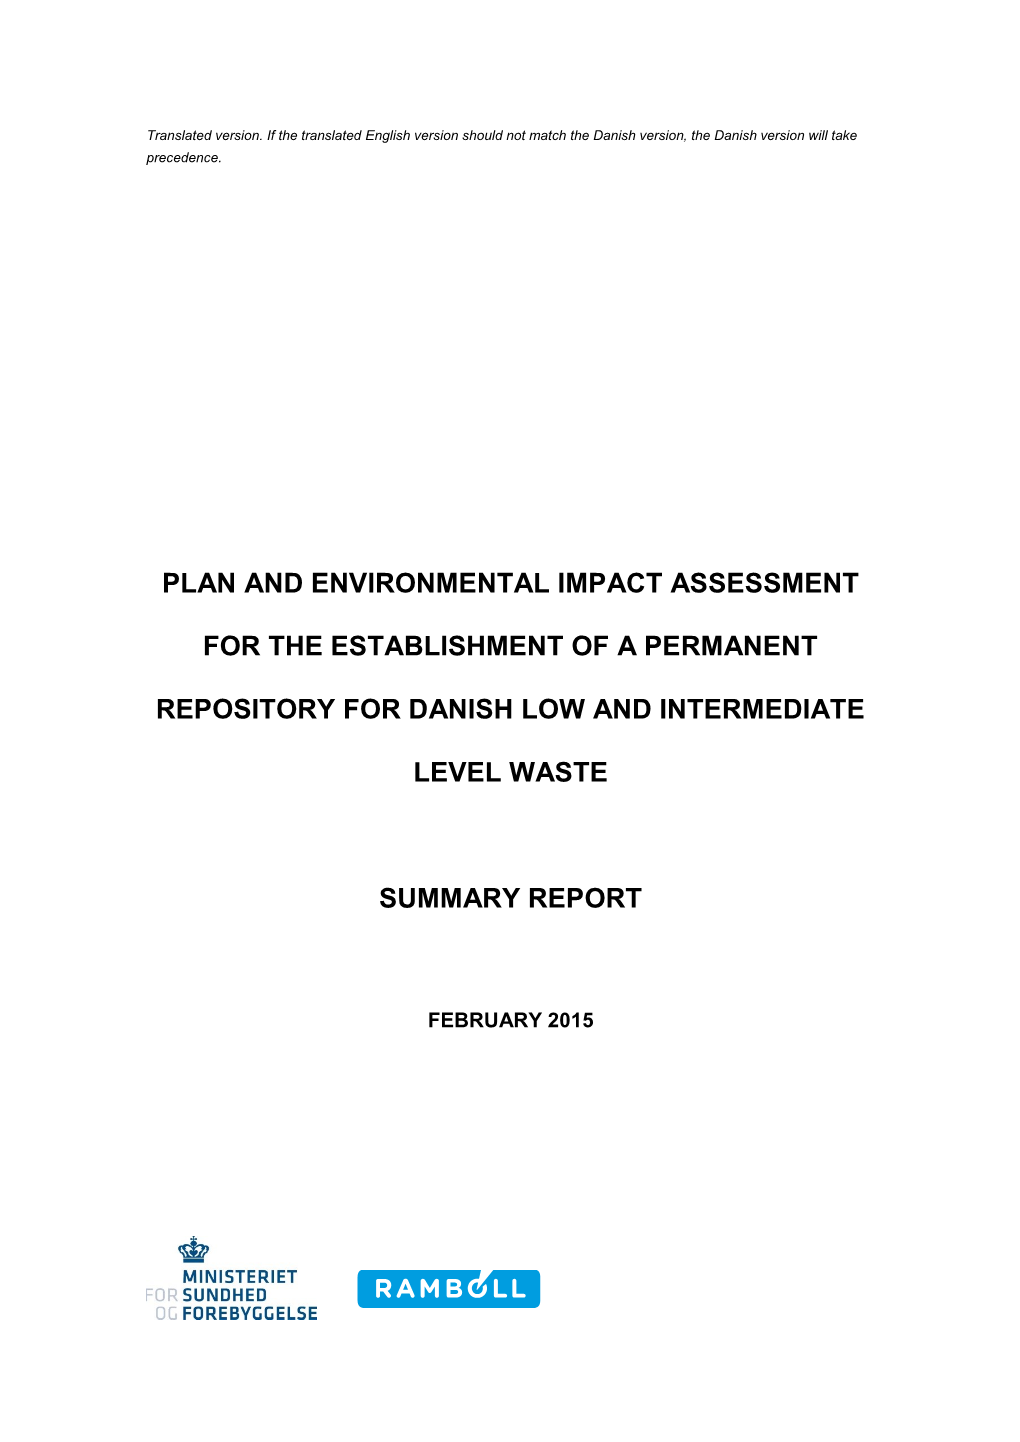 Plan and Environmental Impact Assessment for the Establishment of a Permanent Repository for Danish Low and Intermediate Level Waste’ for Public Consultation; Cf